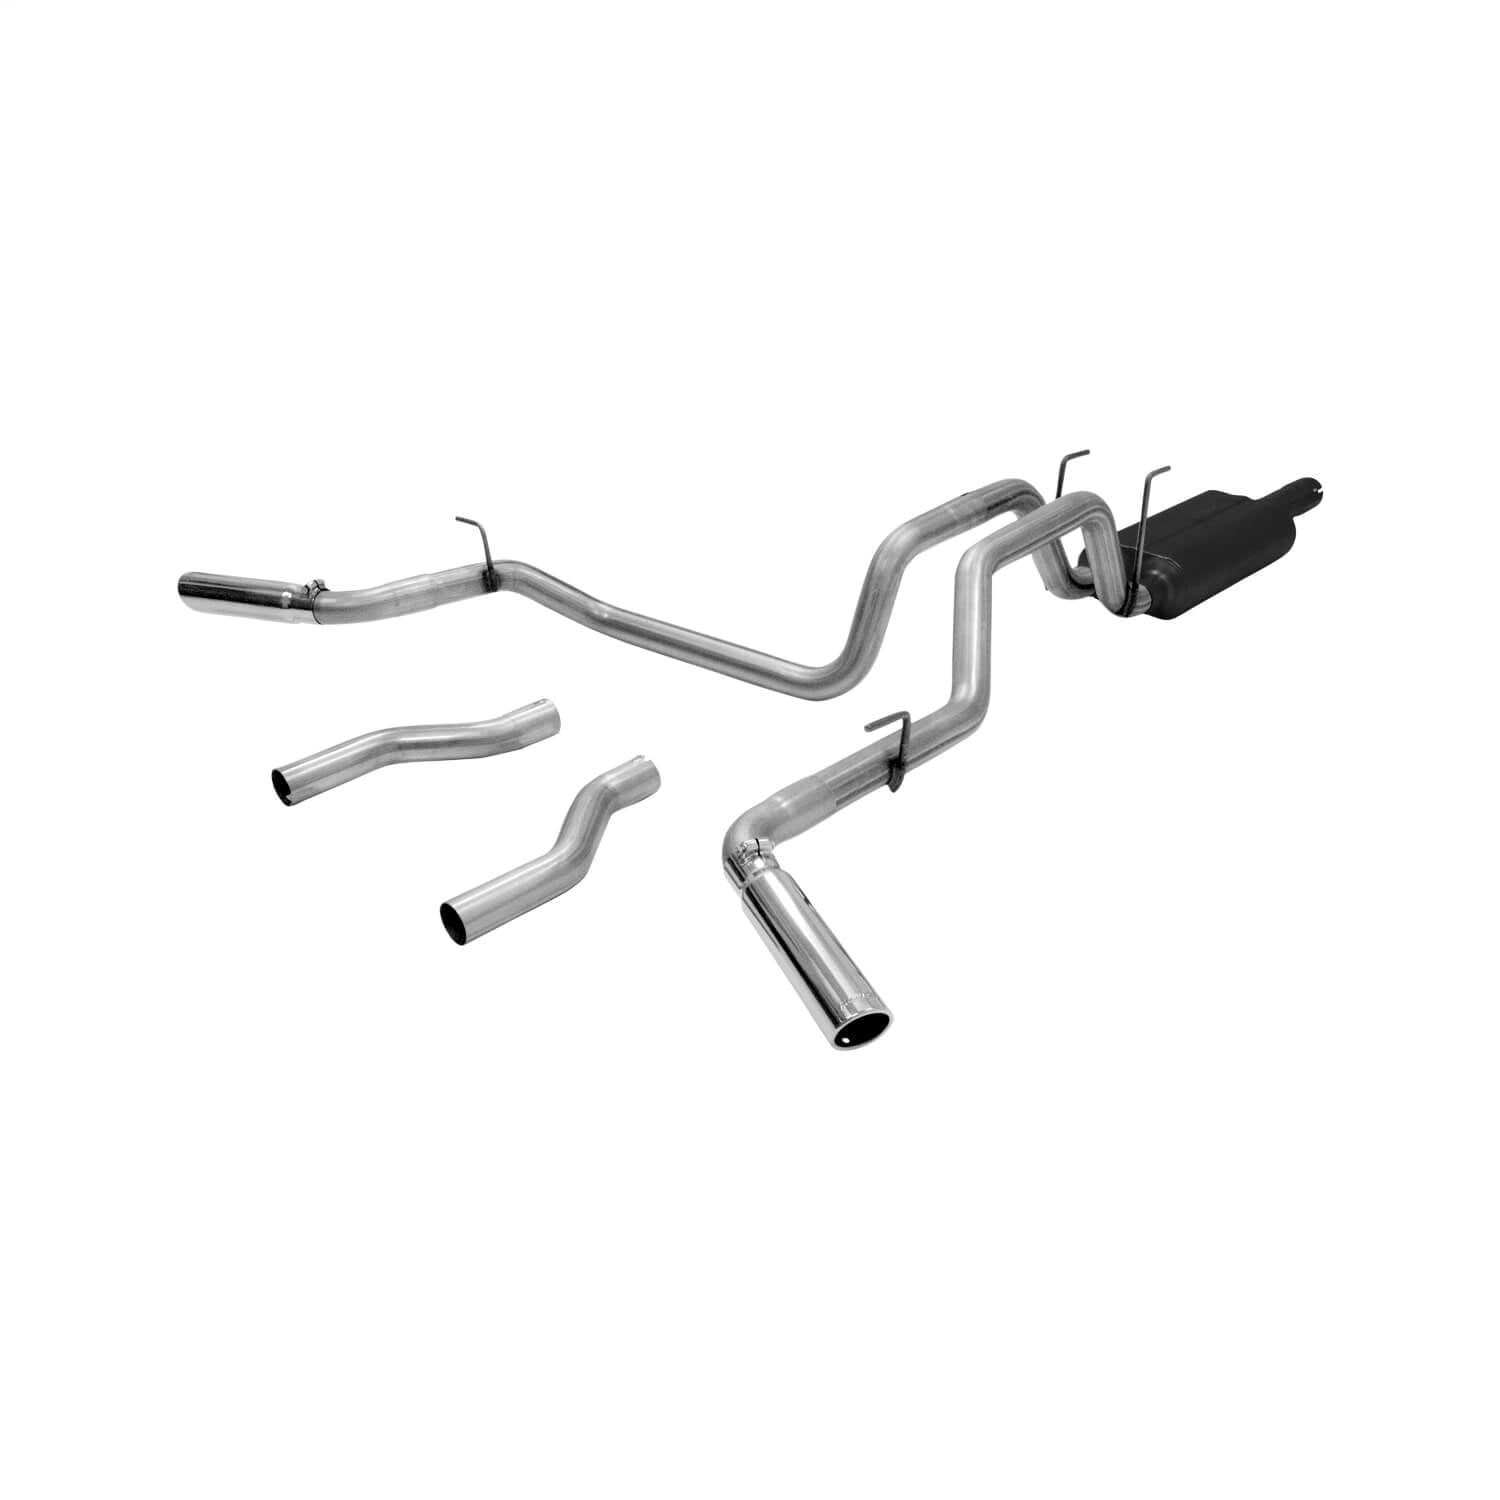 For 96-97 Ford Mustang 4.6L V8 Stainless Steel 2.5 inches OD Dual Muffler Catback Exhaust System Kit 